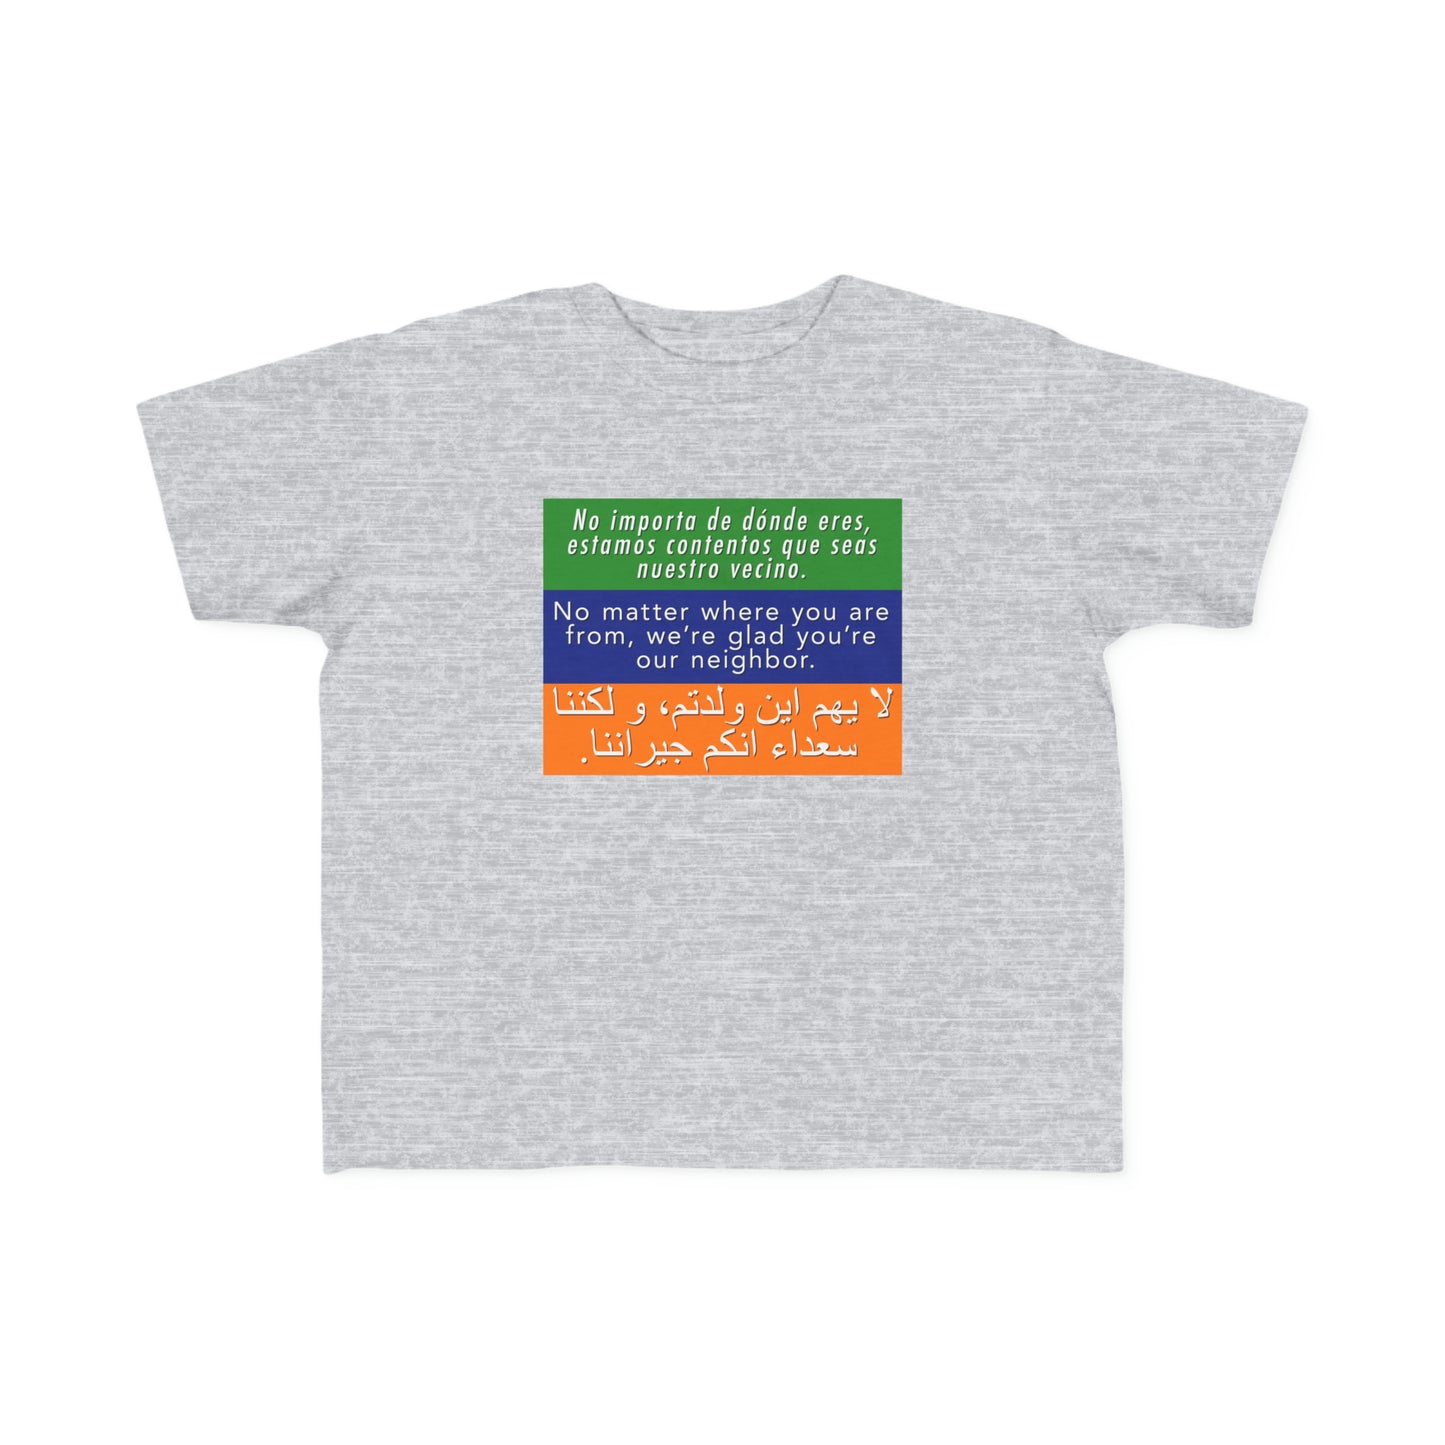 “Welcome Your Neighbors” Toddler's Tee